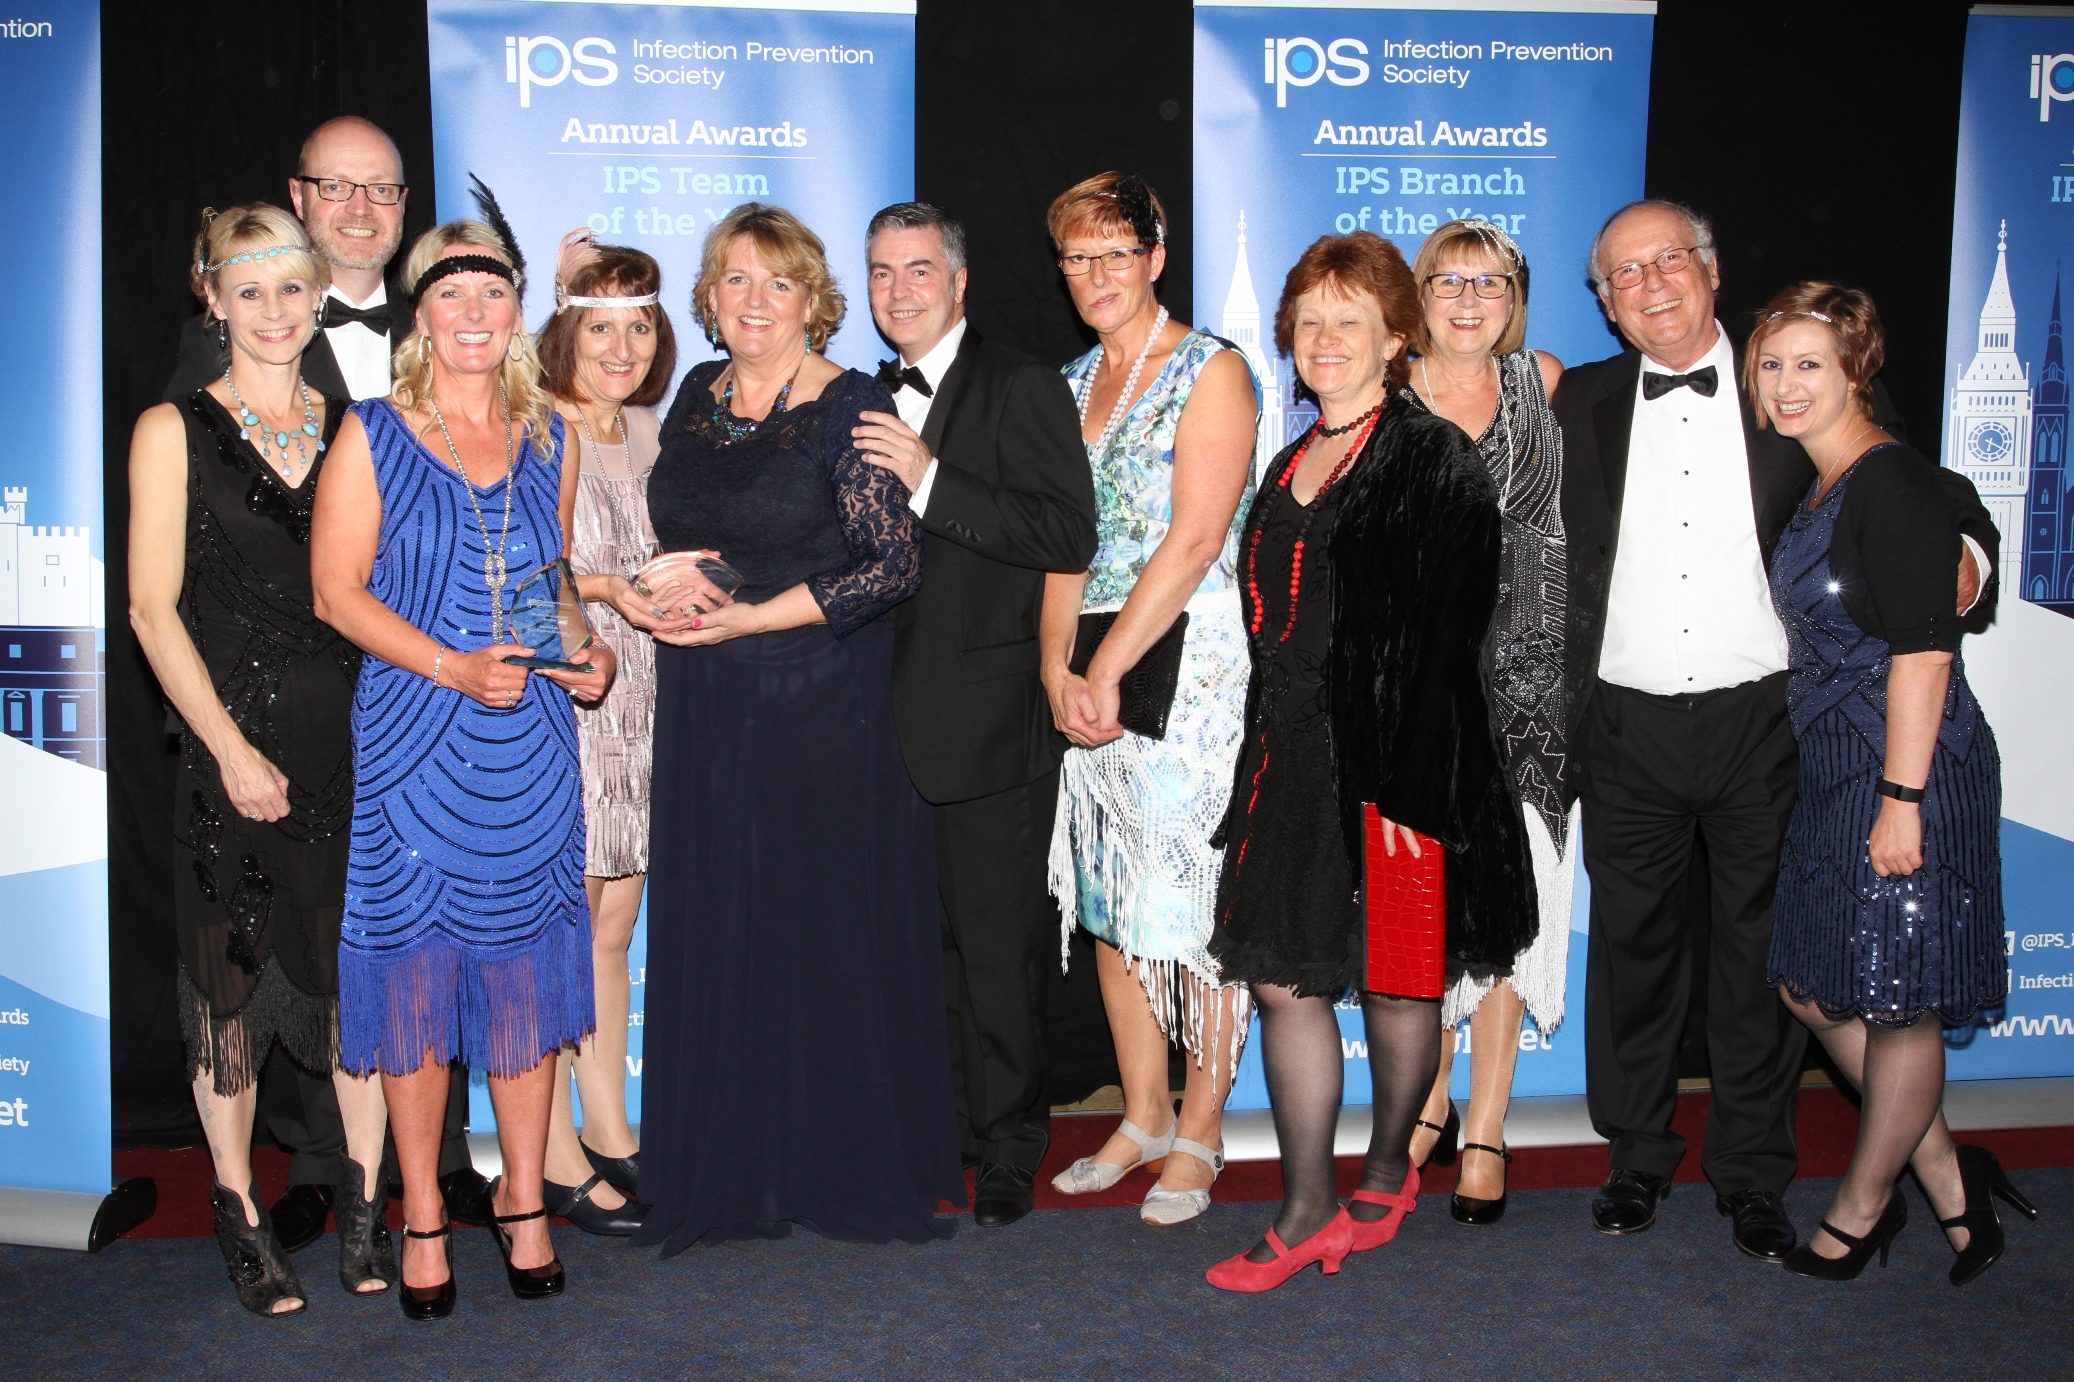 North Yorkshire Community Infection Prevention and Control Team Winner of IPS Team of the Year 2016